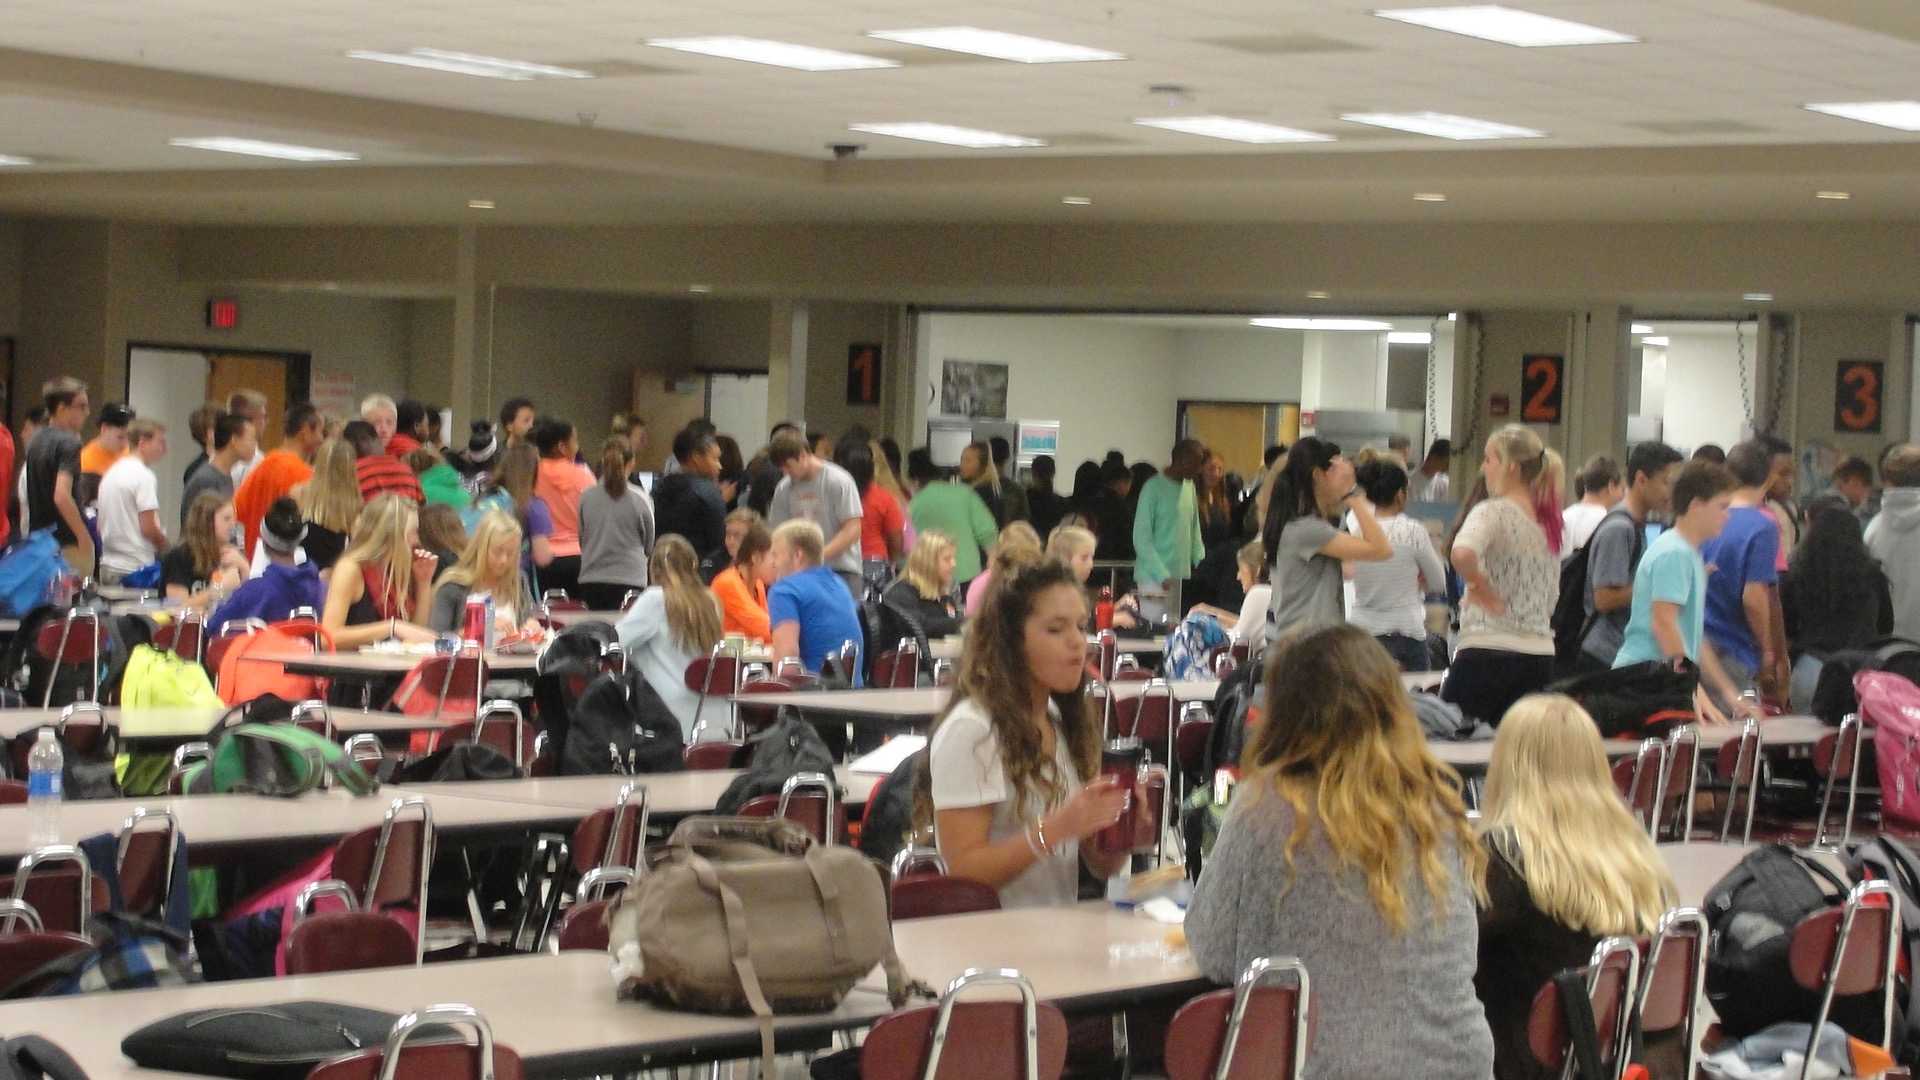 Students line up for lunch. (Sept. 21-25)